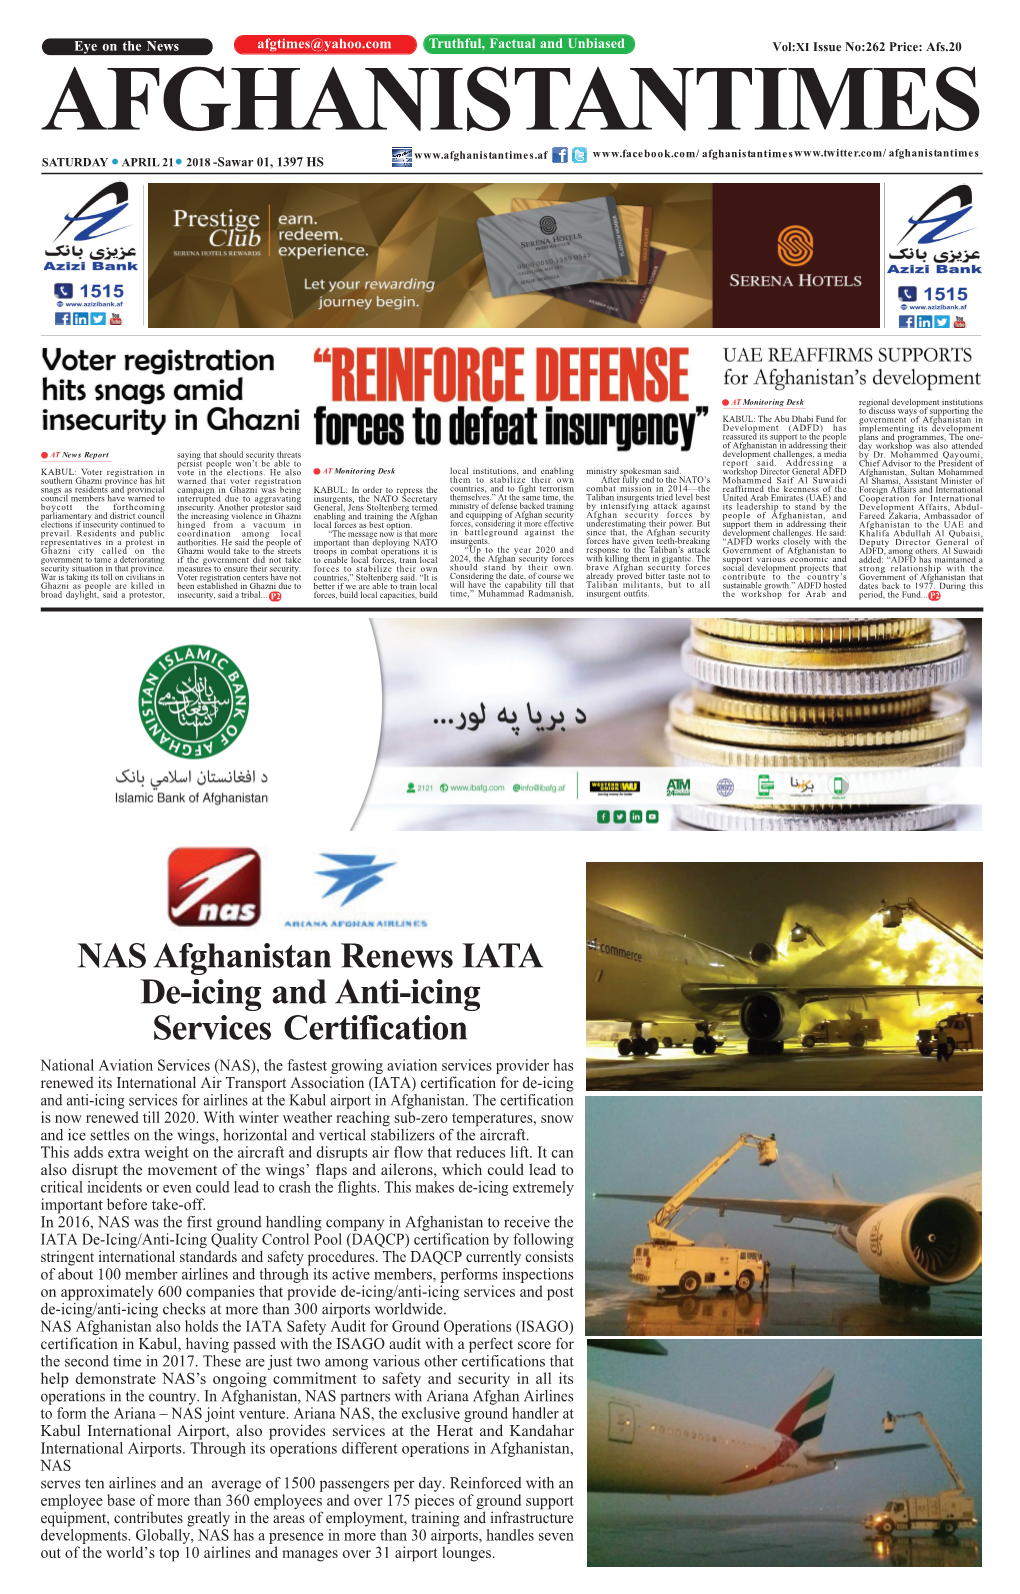 NAS Afghanistan Renews IATA De-Icing and Anti-Icing Services Certification